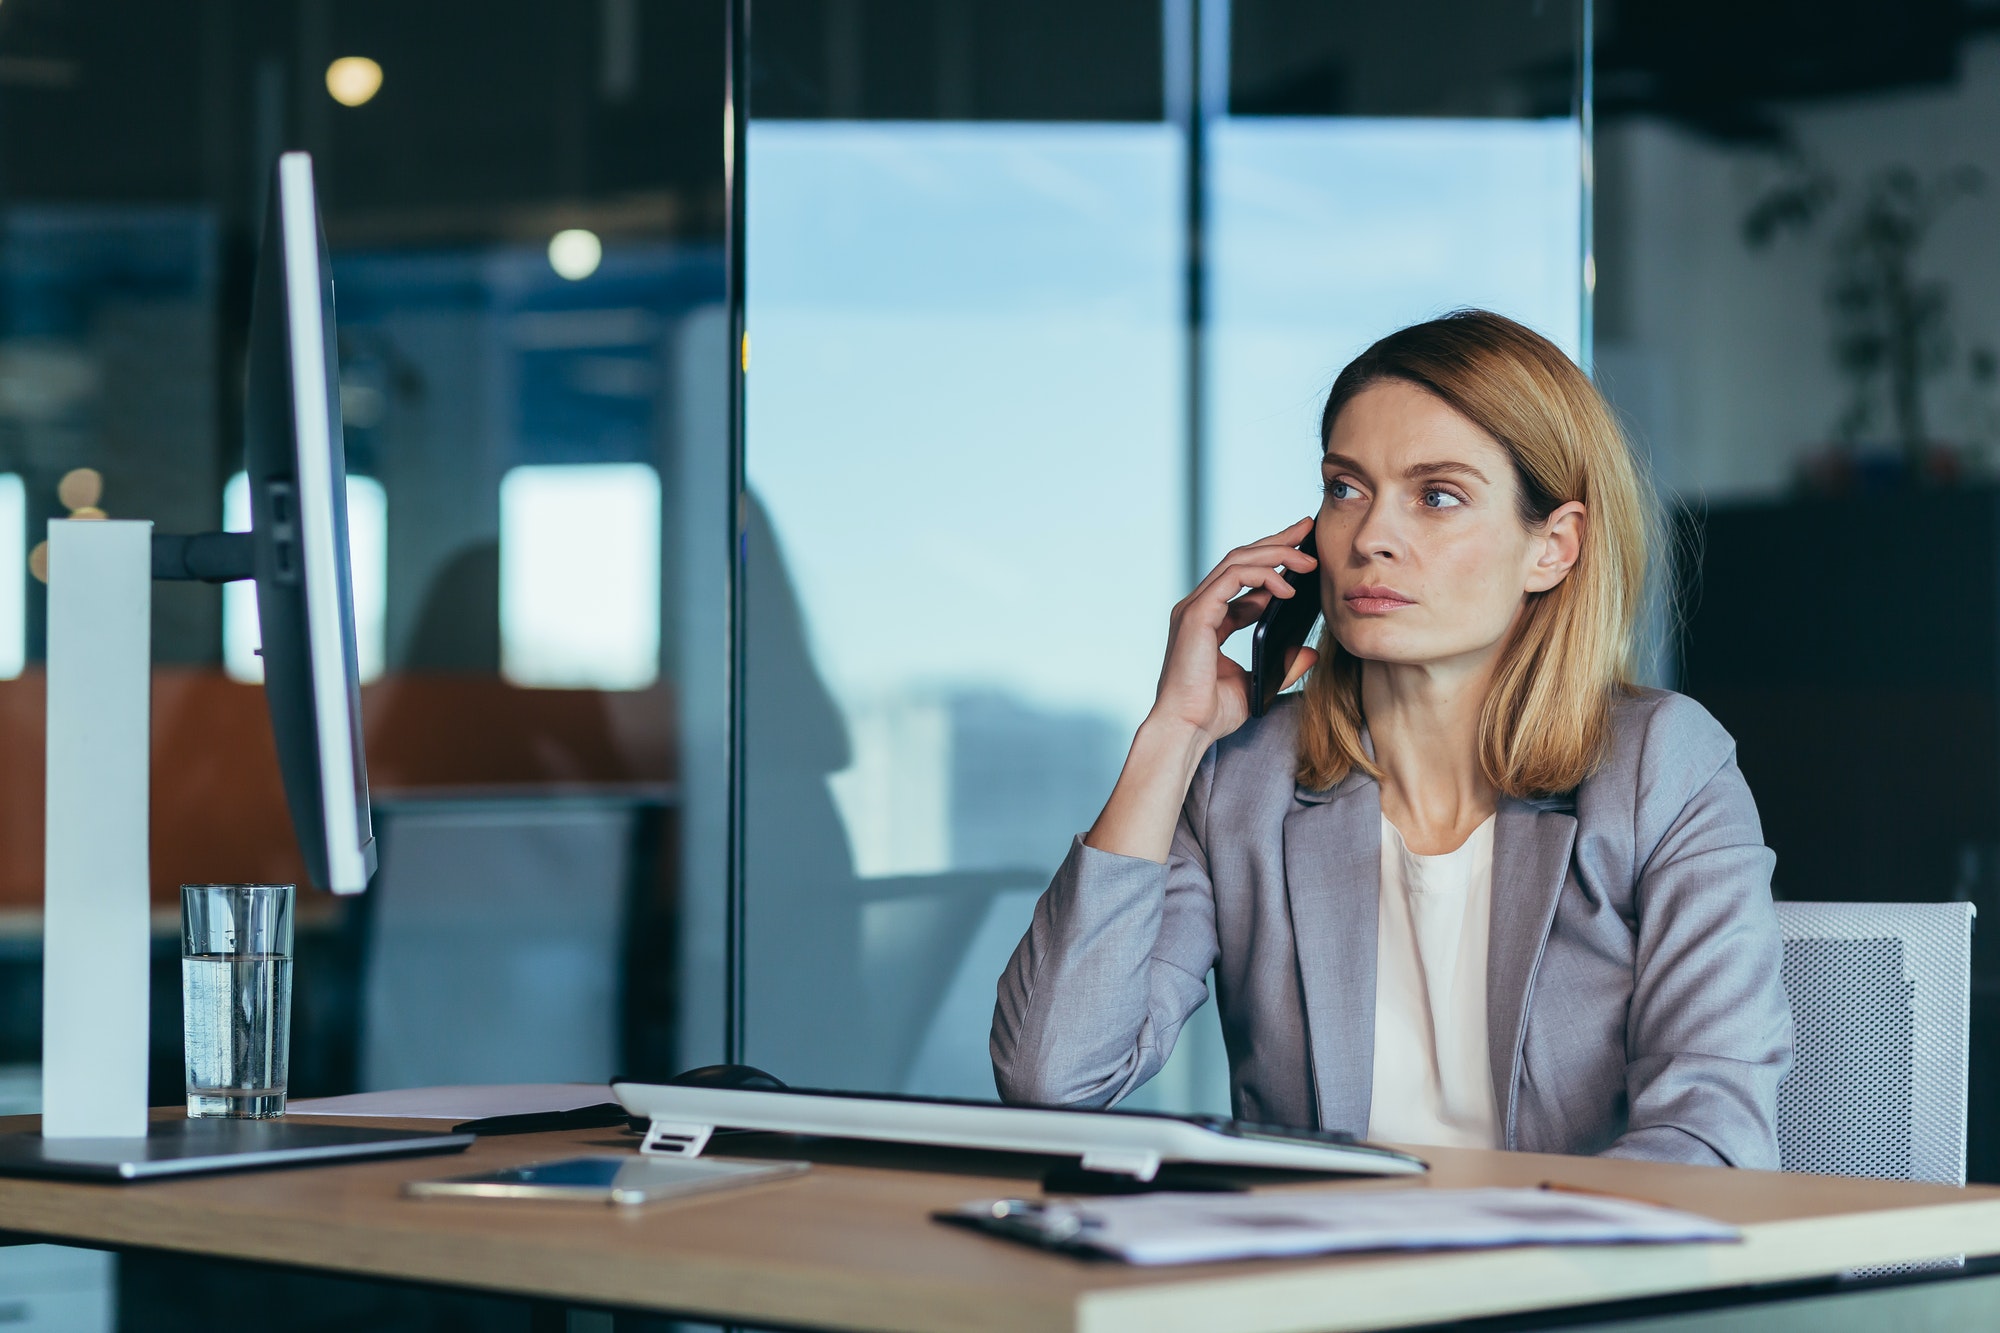 Serious and anxious business woman talking on the phone, working in a modern office